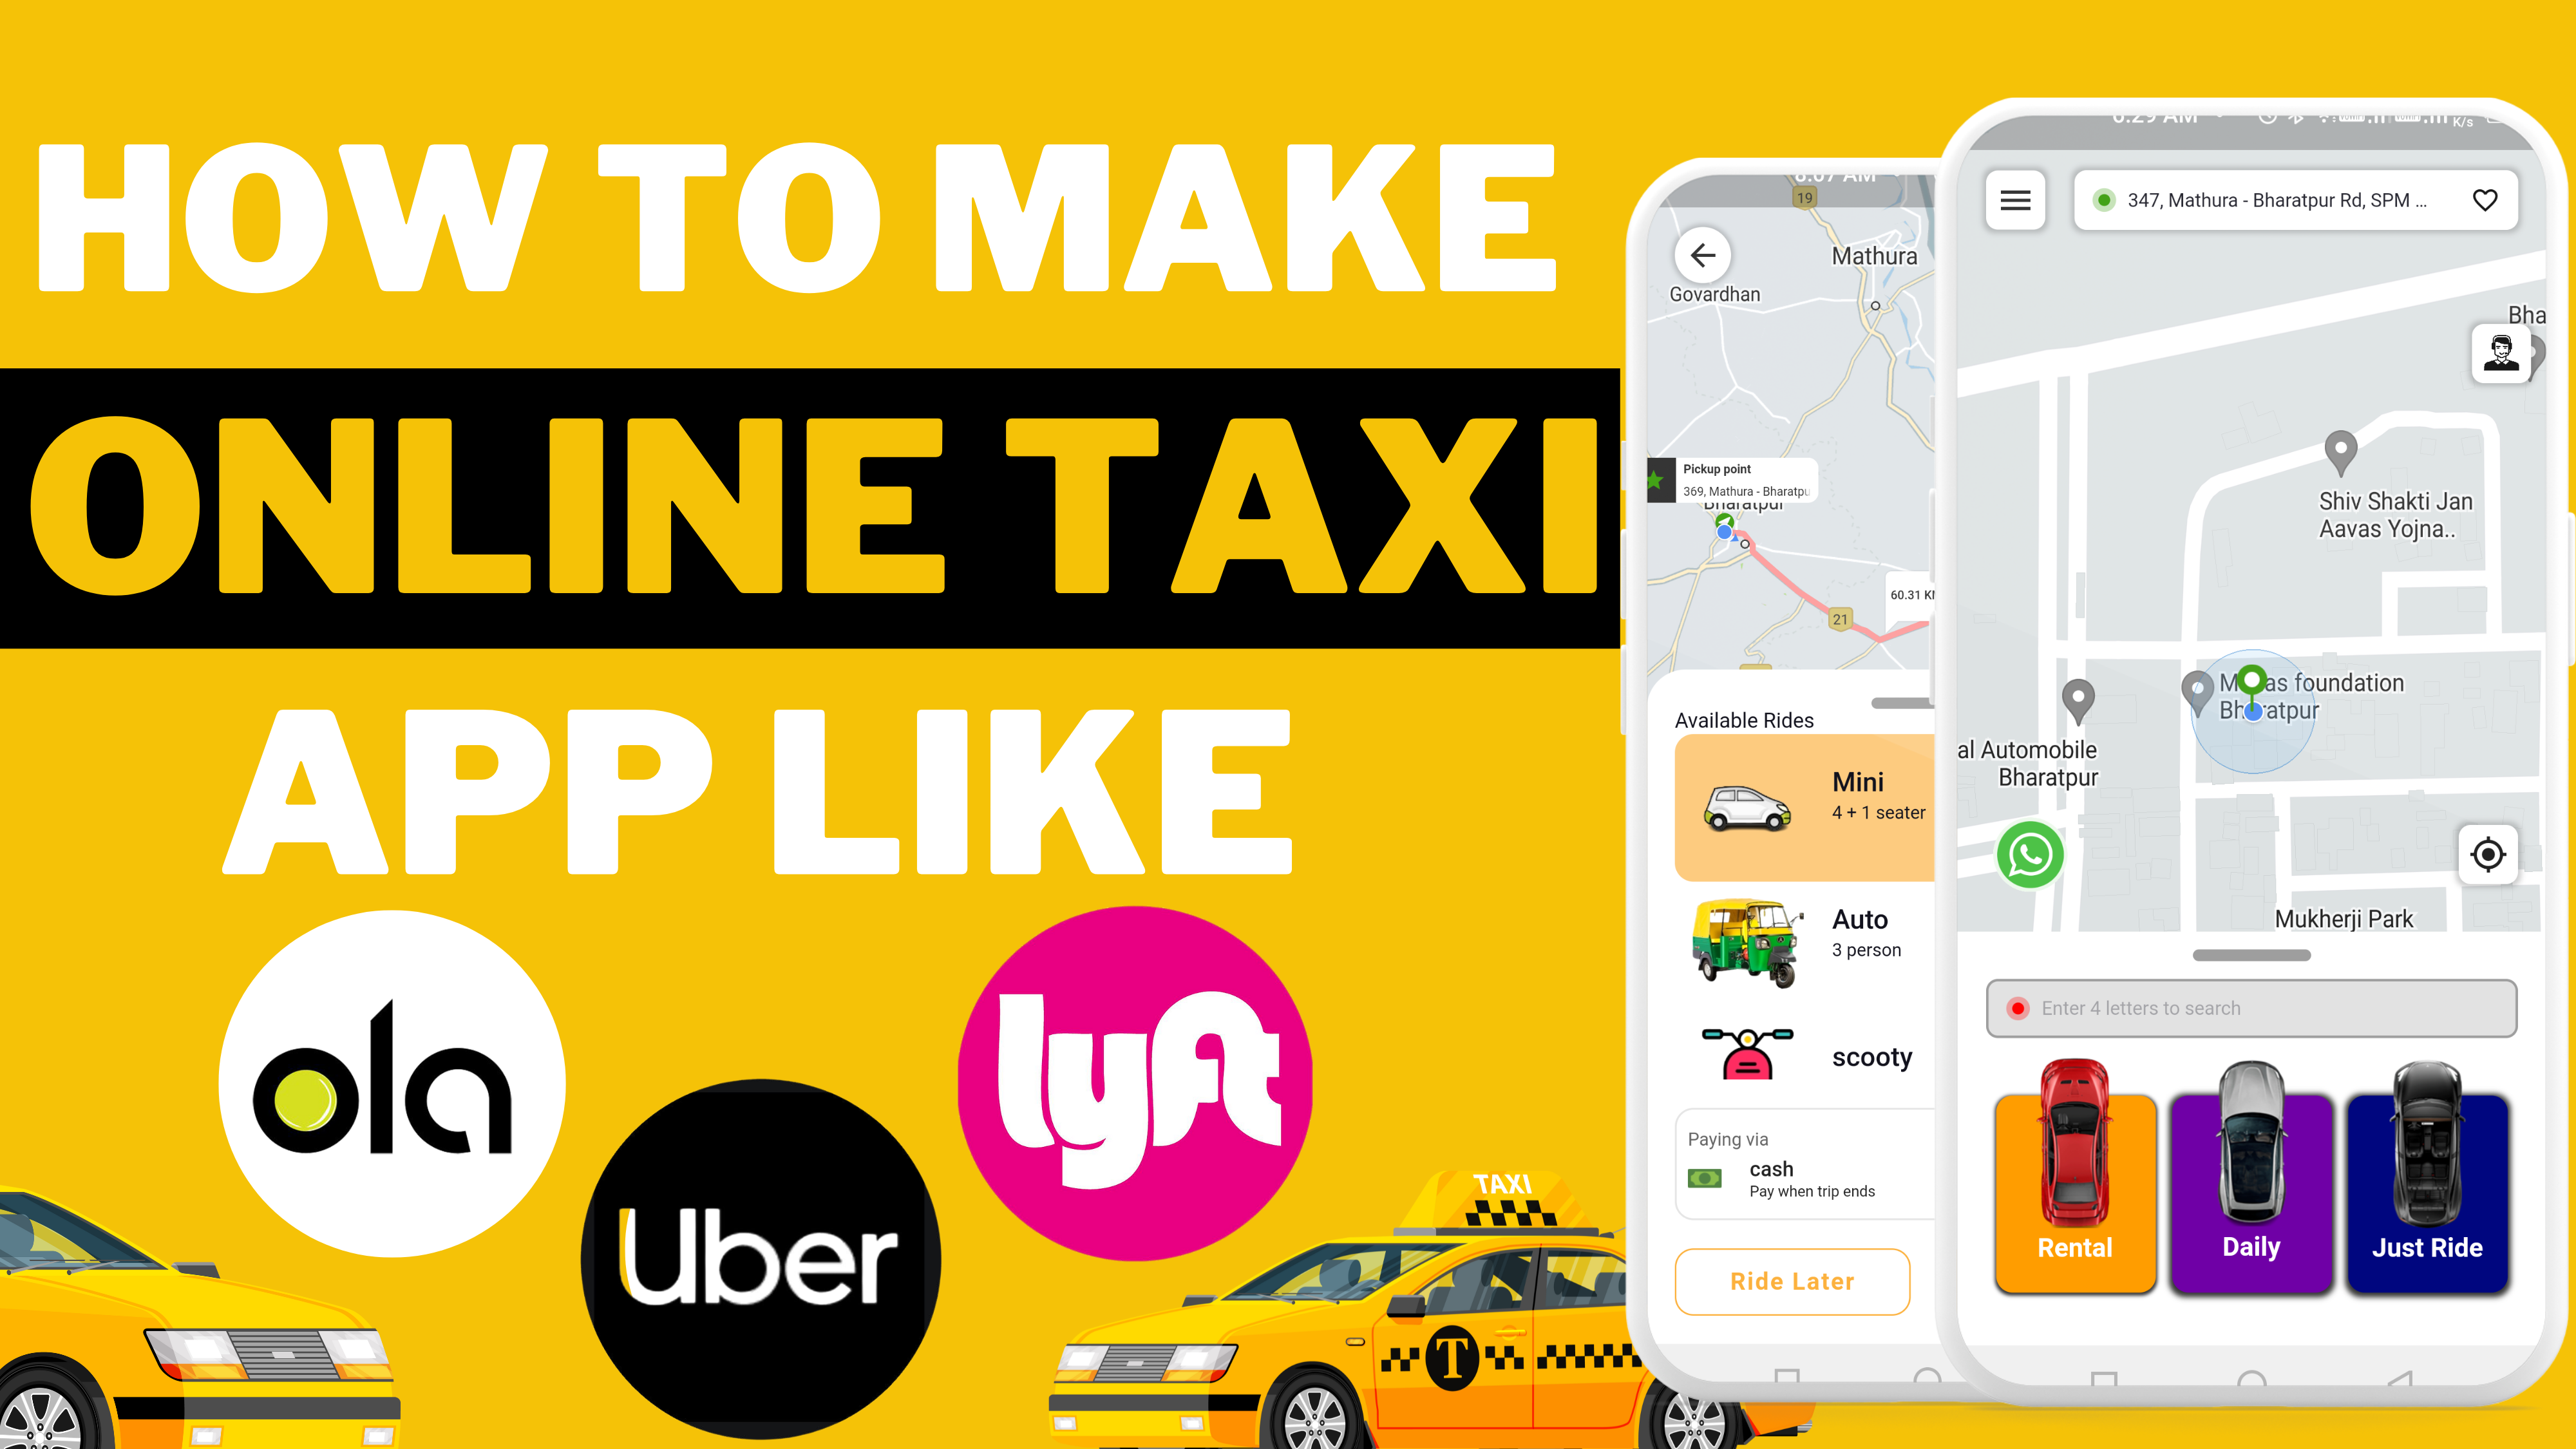 how to make online taxi app like uber